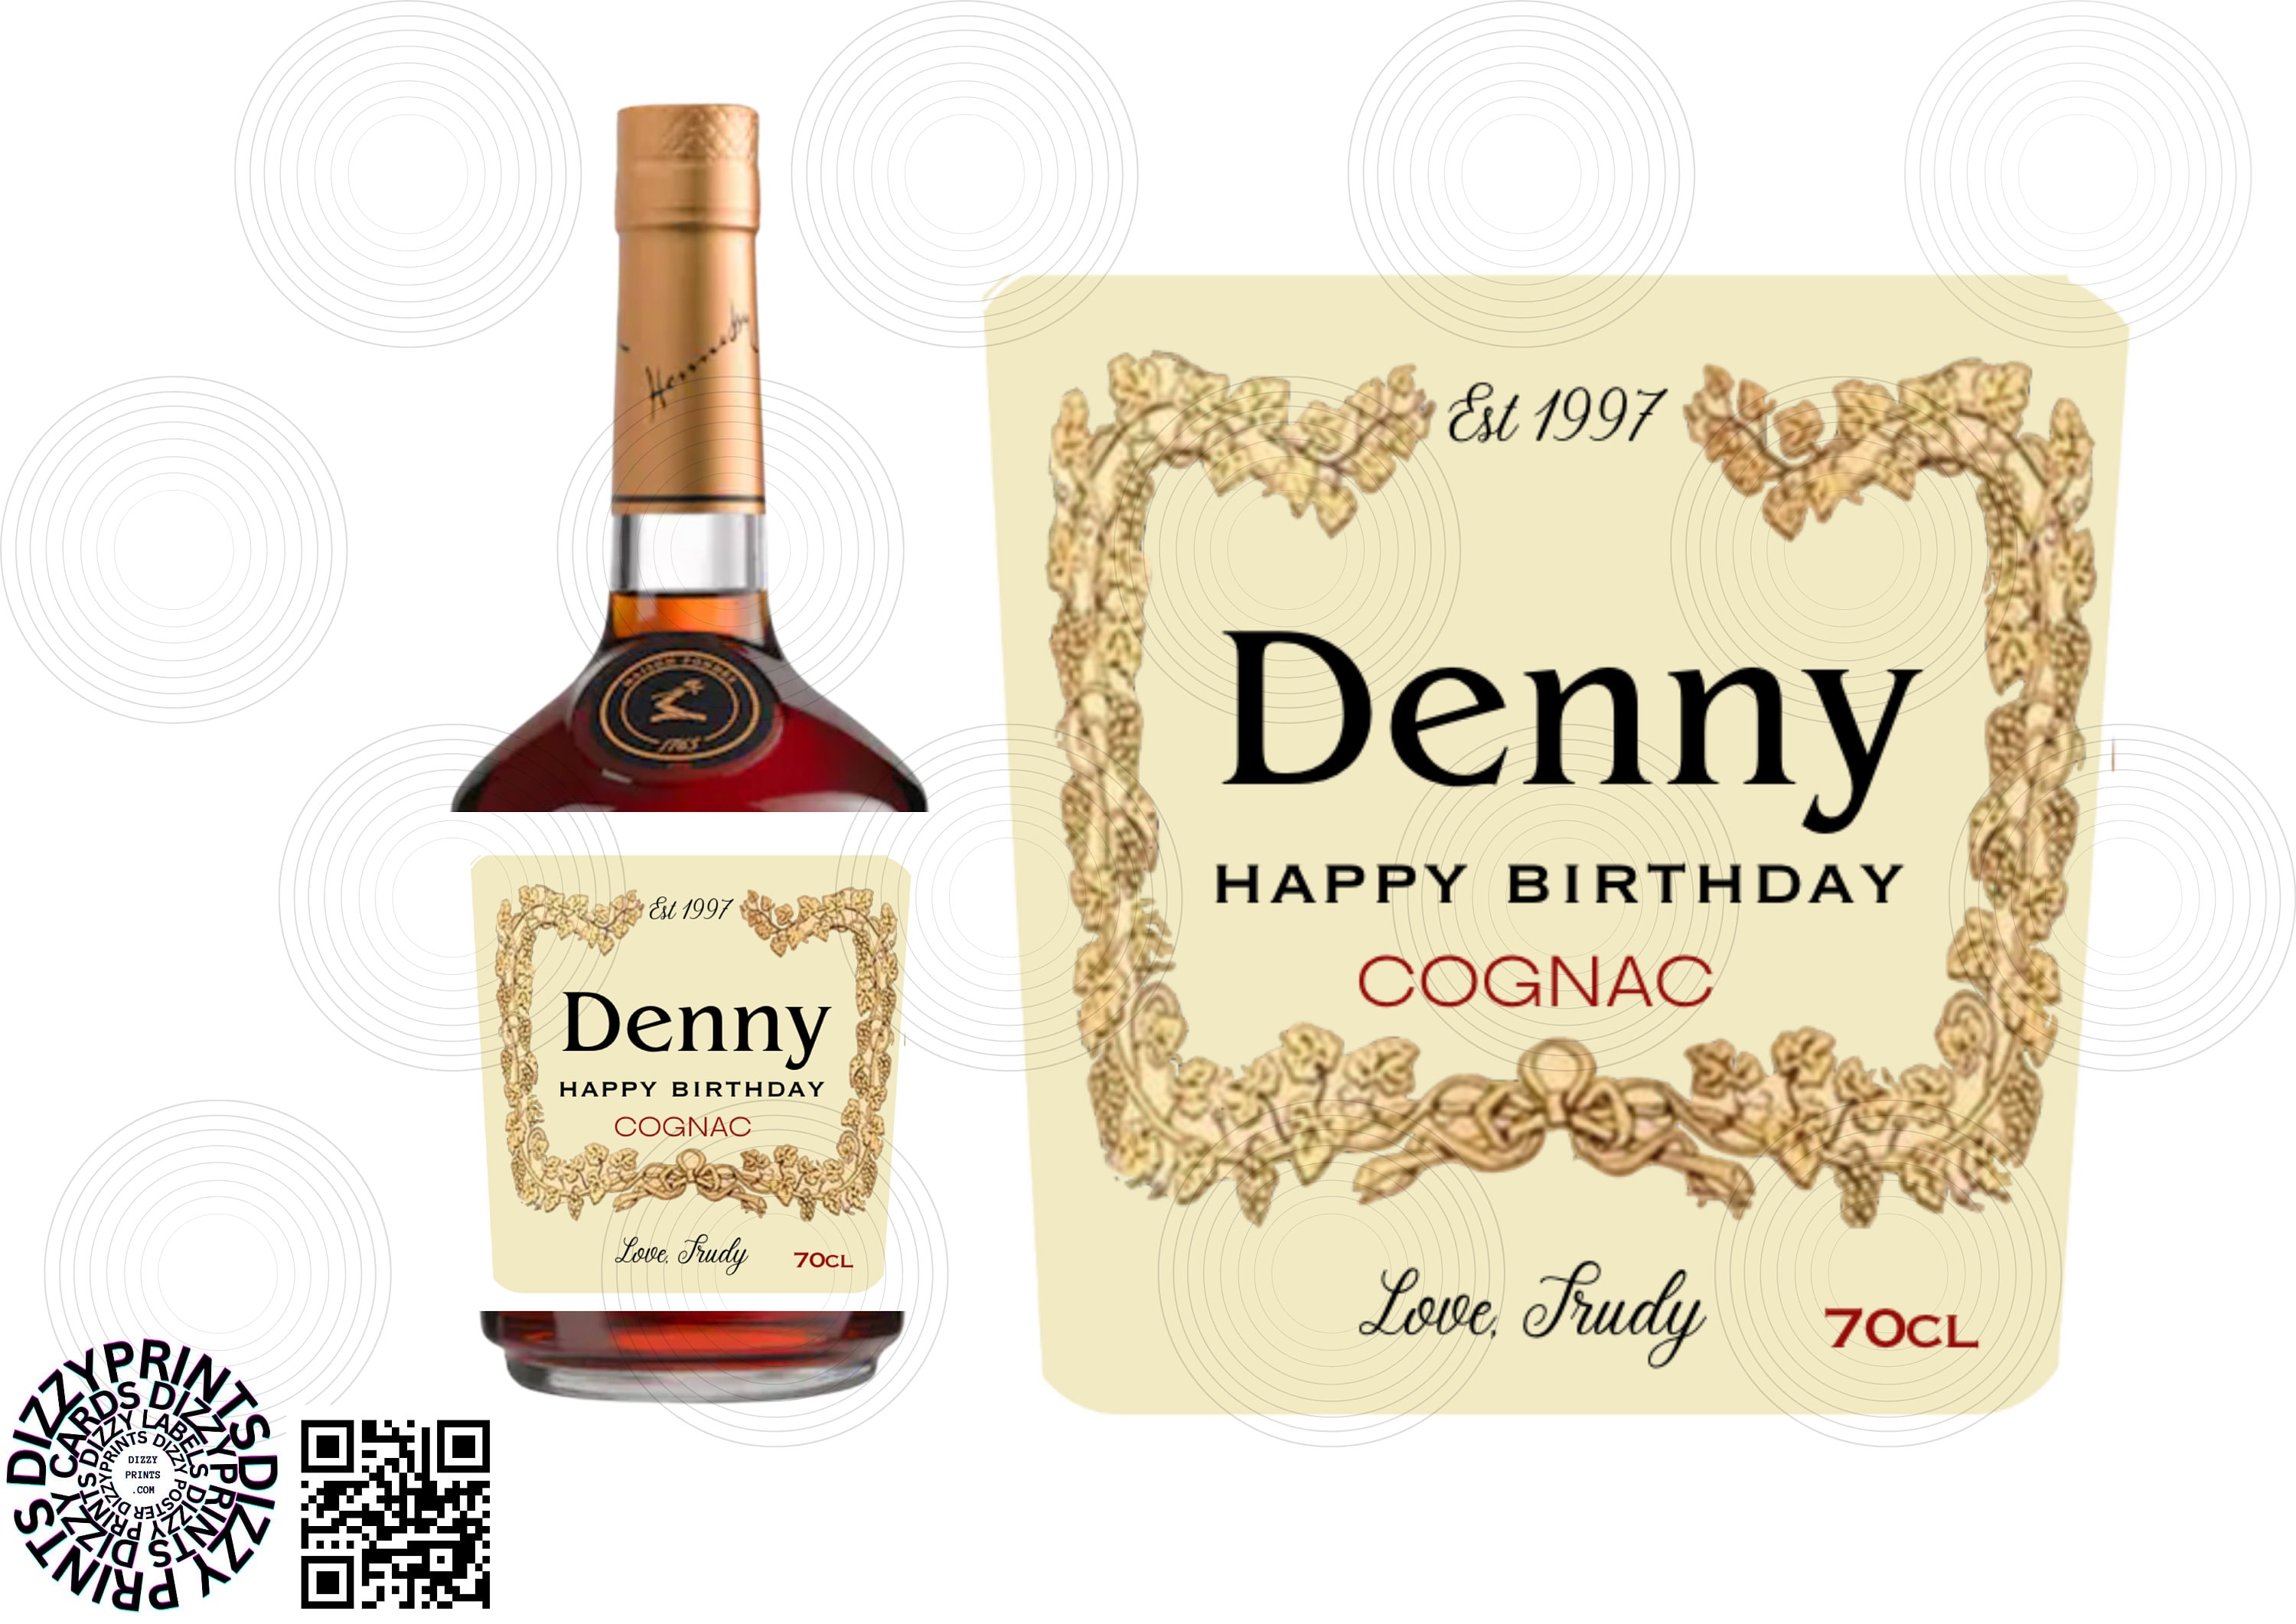 Hennessy Very Special Cognac 50ml Sleeve (12 bottles)